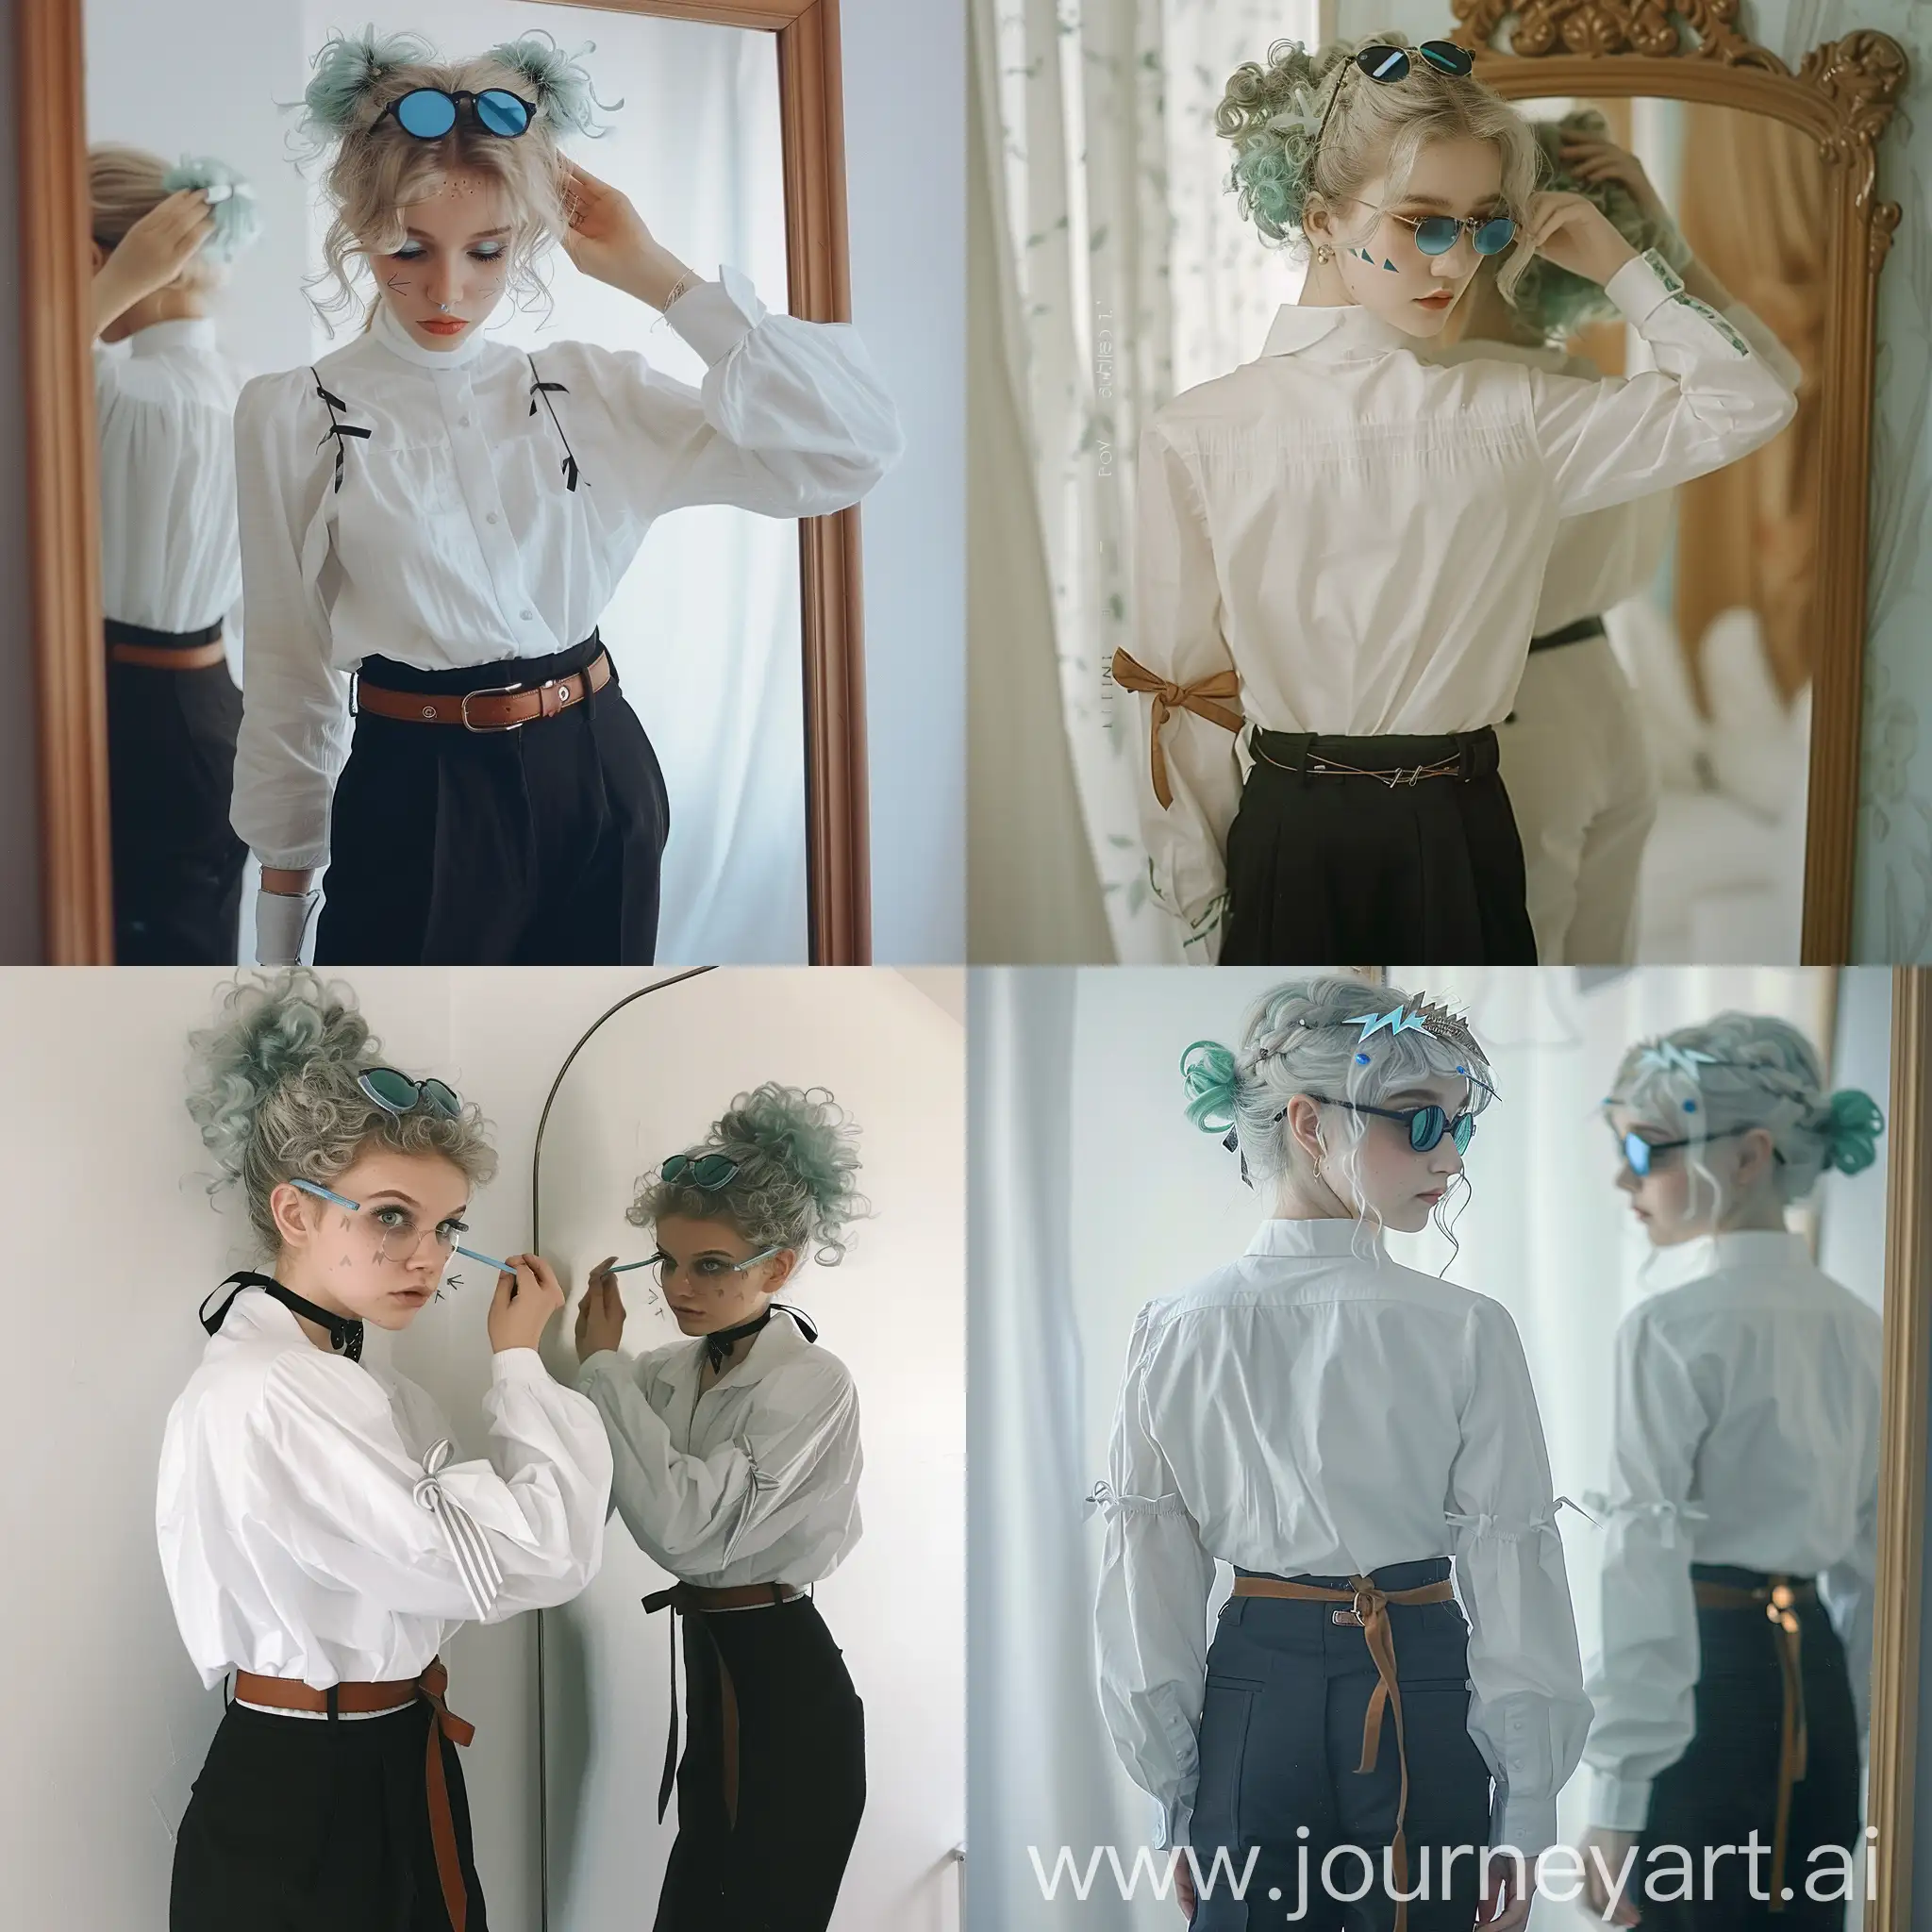 /imagine prompt: wearing a white shirt with small ribbons on the loose sleeves, she accentuated her waist with black trousers and a thin brown belt. a small accessory on her head from a shock of silver curls gathered in a high ponytail was sunglasses. they emphasized the rich color of the escaping mint strands in her hairstyle. standing at the mirror, the girl applied her everyday light makeup: she drew small arrows with blue eyeliner, emphasizing her light green eyes, and, charging herself with positivity, gently smiled at herself in the mirror, lifting the corners of her naturally snow-white lips.:: --v 4